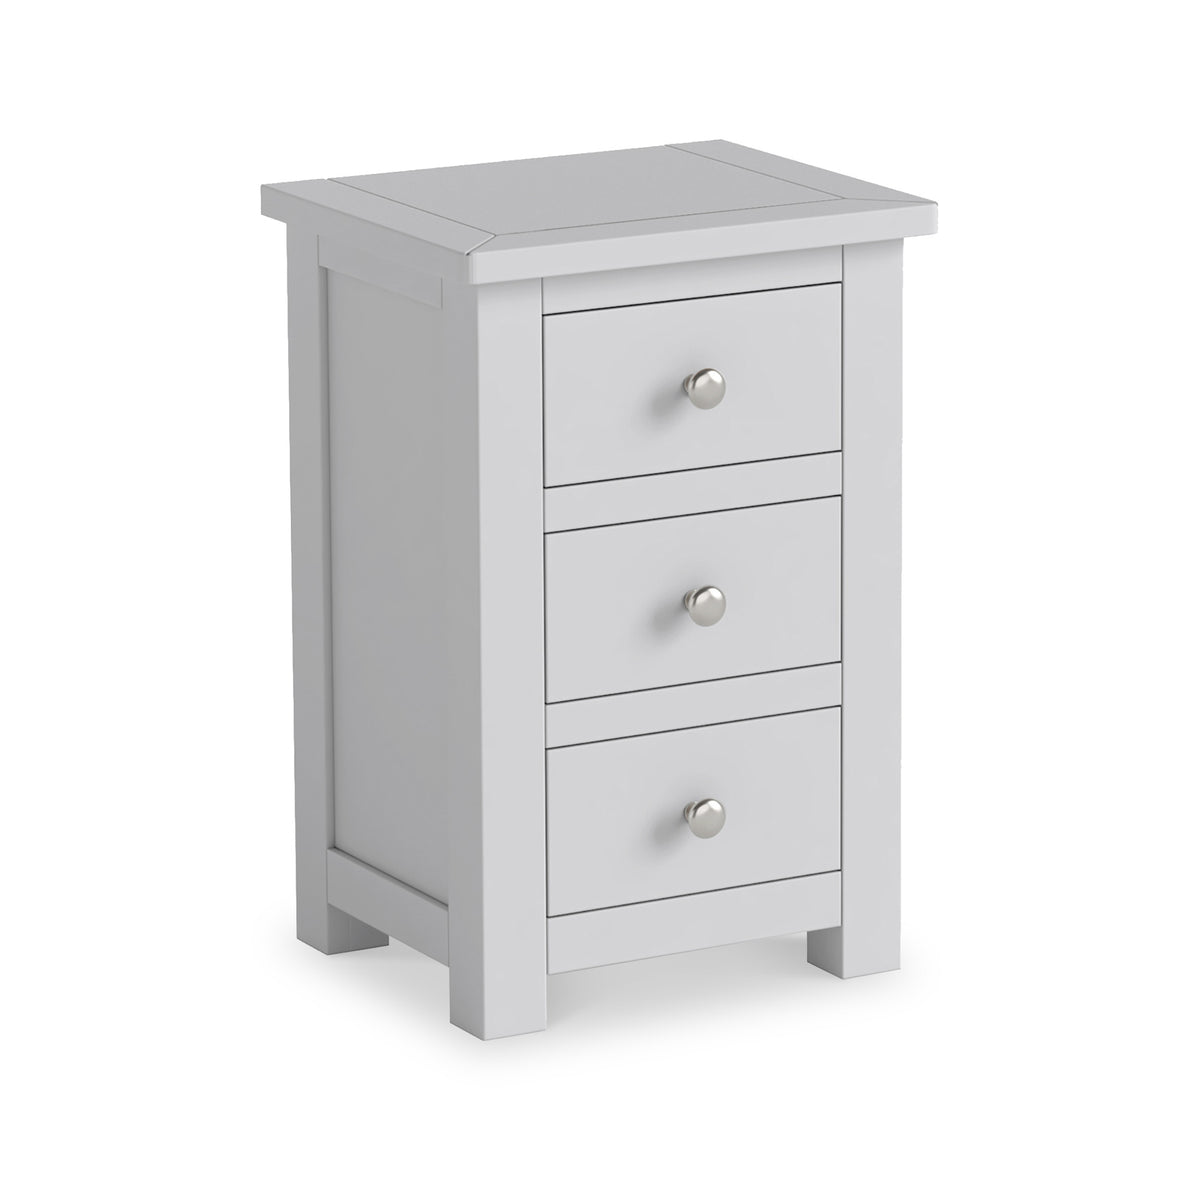 Duchy Inox Grey 3 Drawer Bedside Table from Roseland Furniture